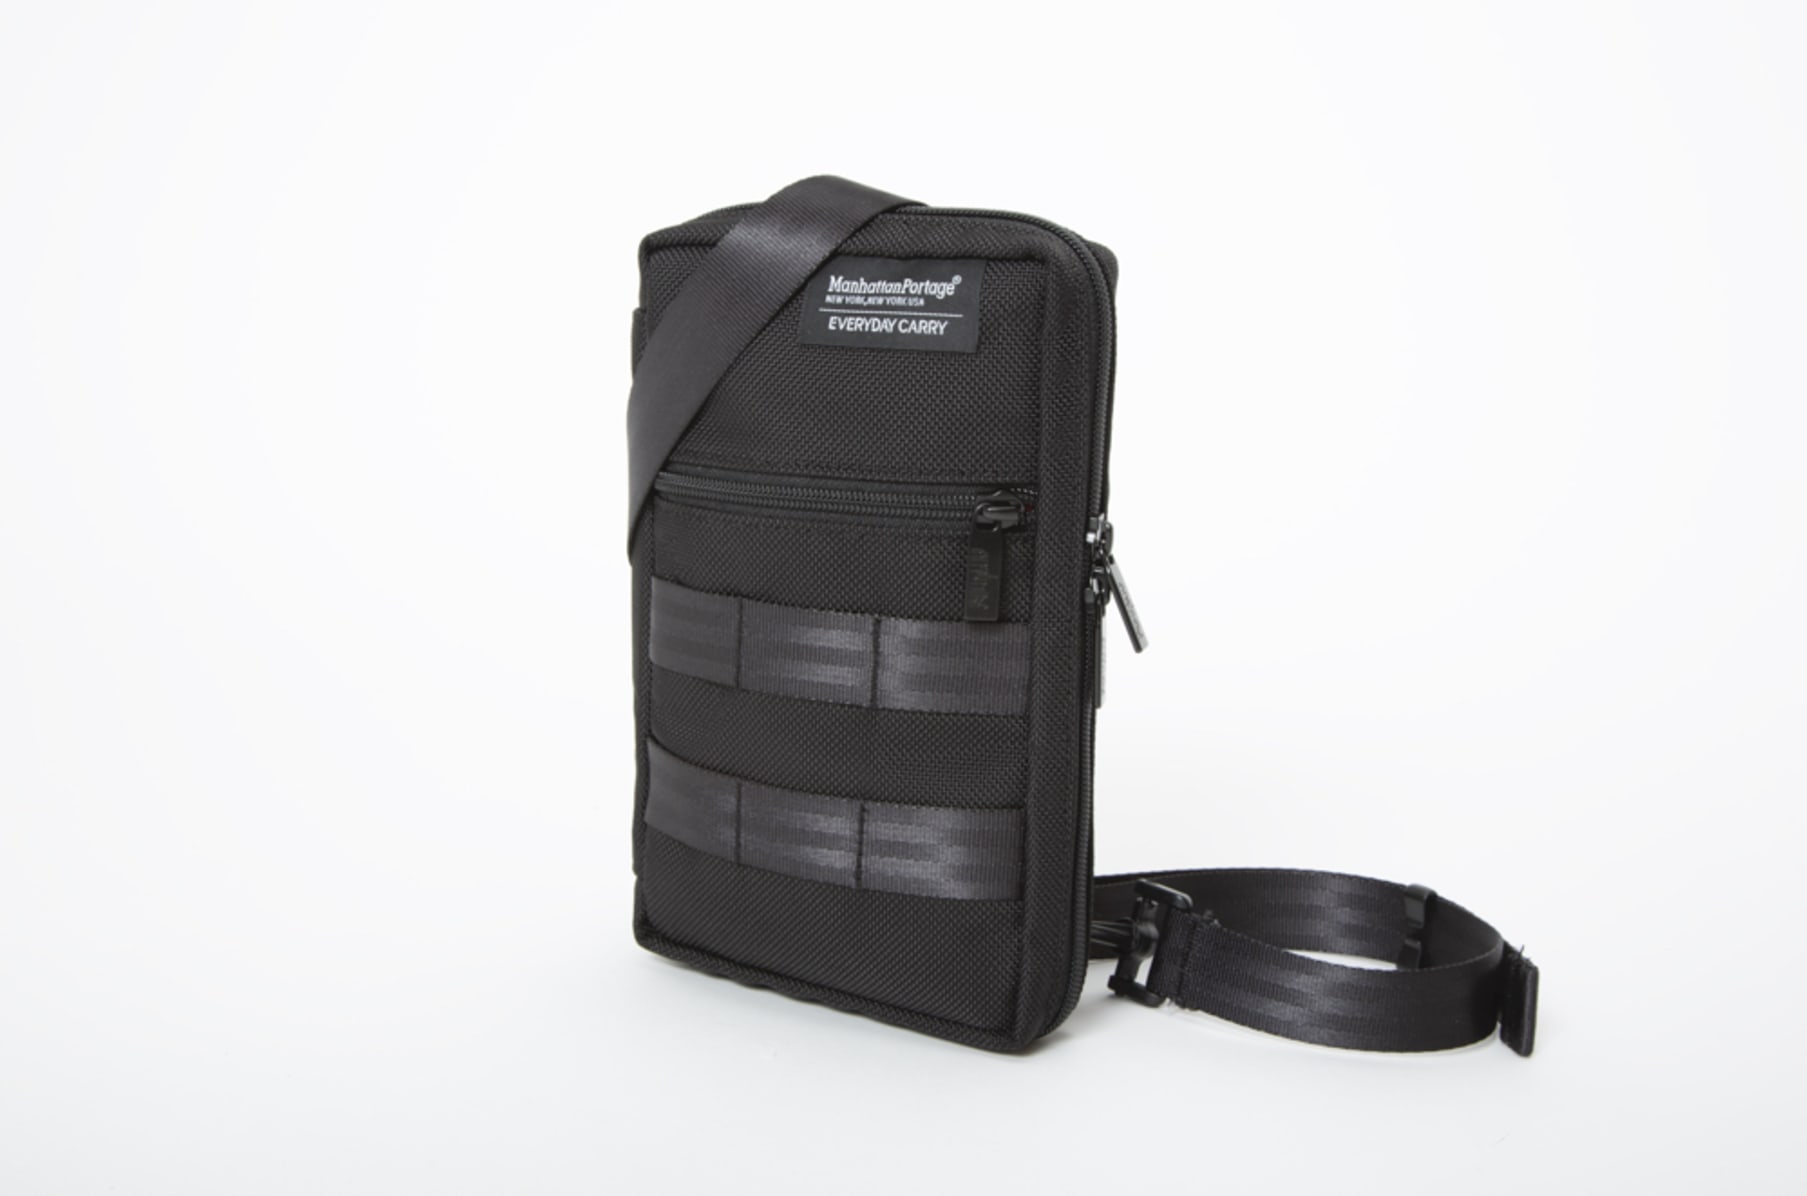 Atlas Sling: The Ultimate Bag for Organized Gear | Indiegogo